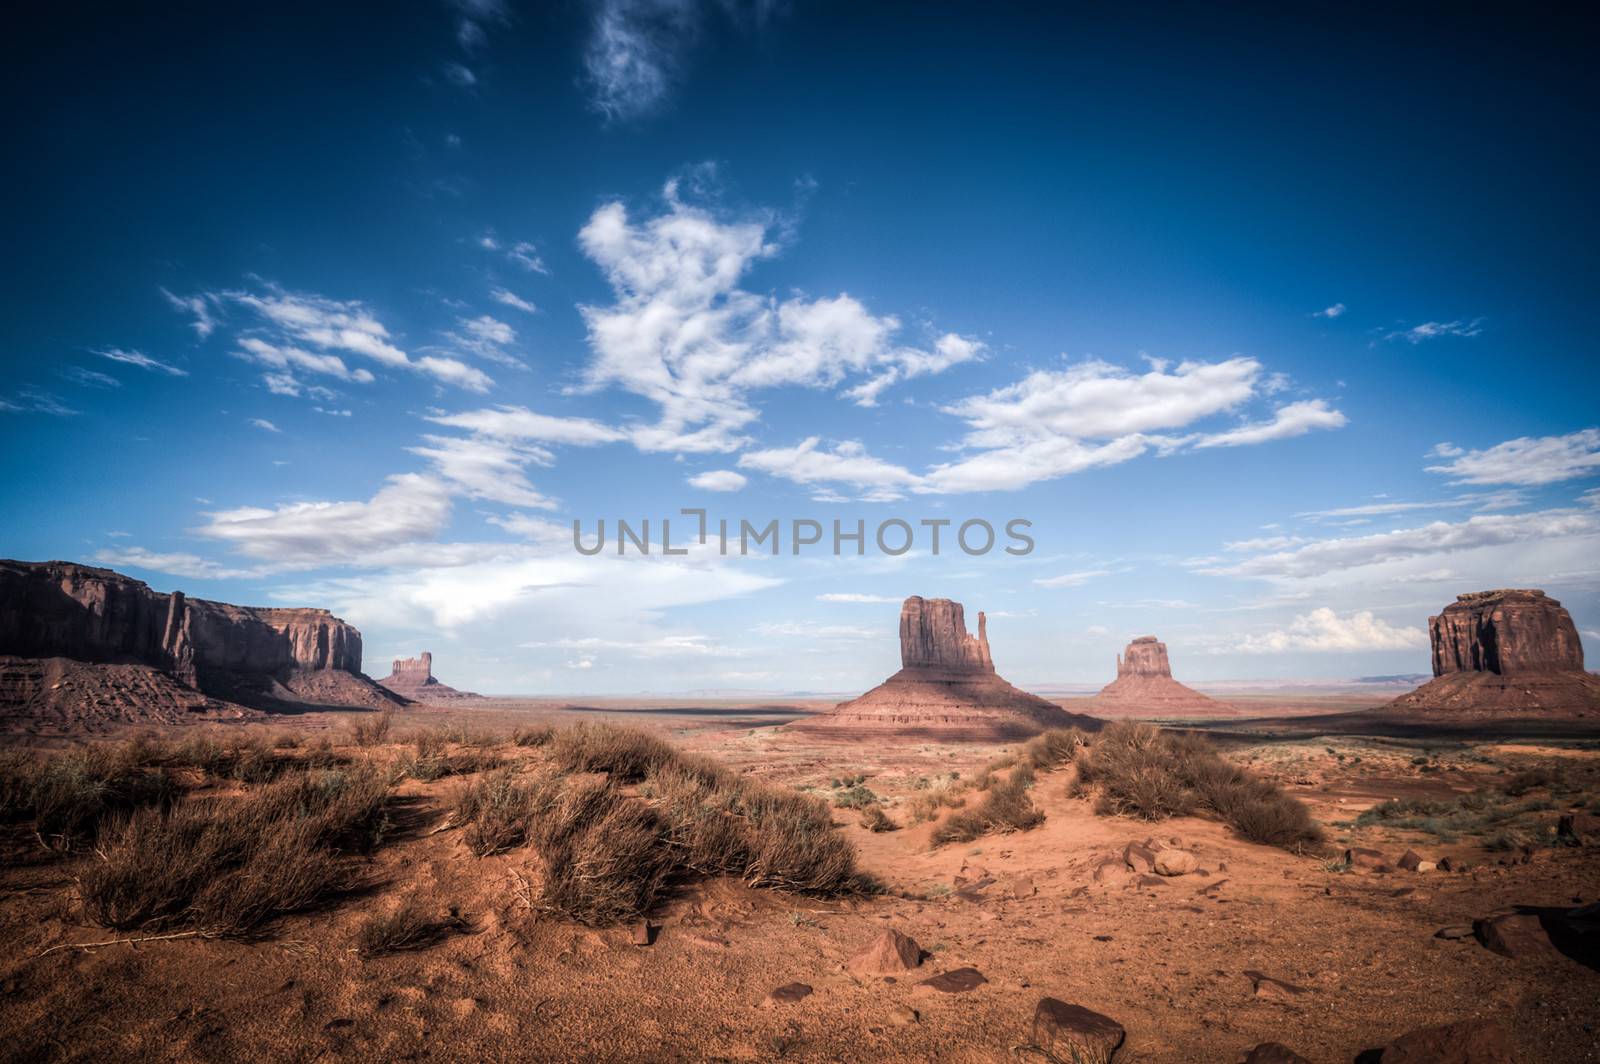 Monument valley panorama by weltreisendertj